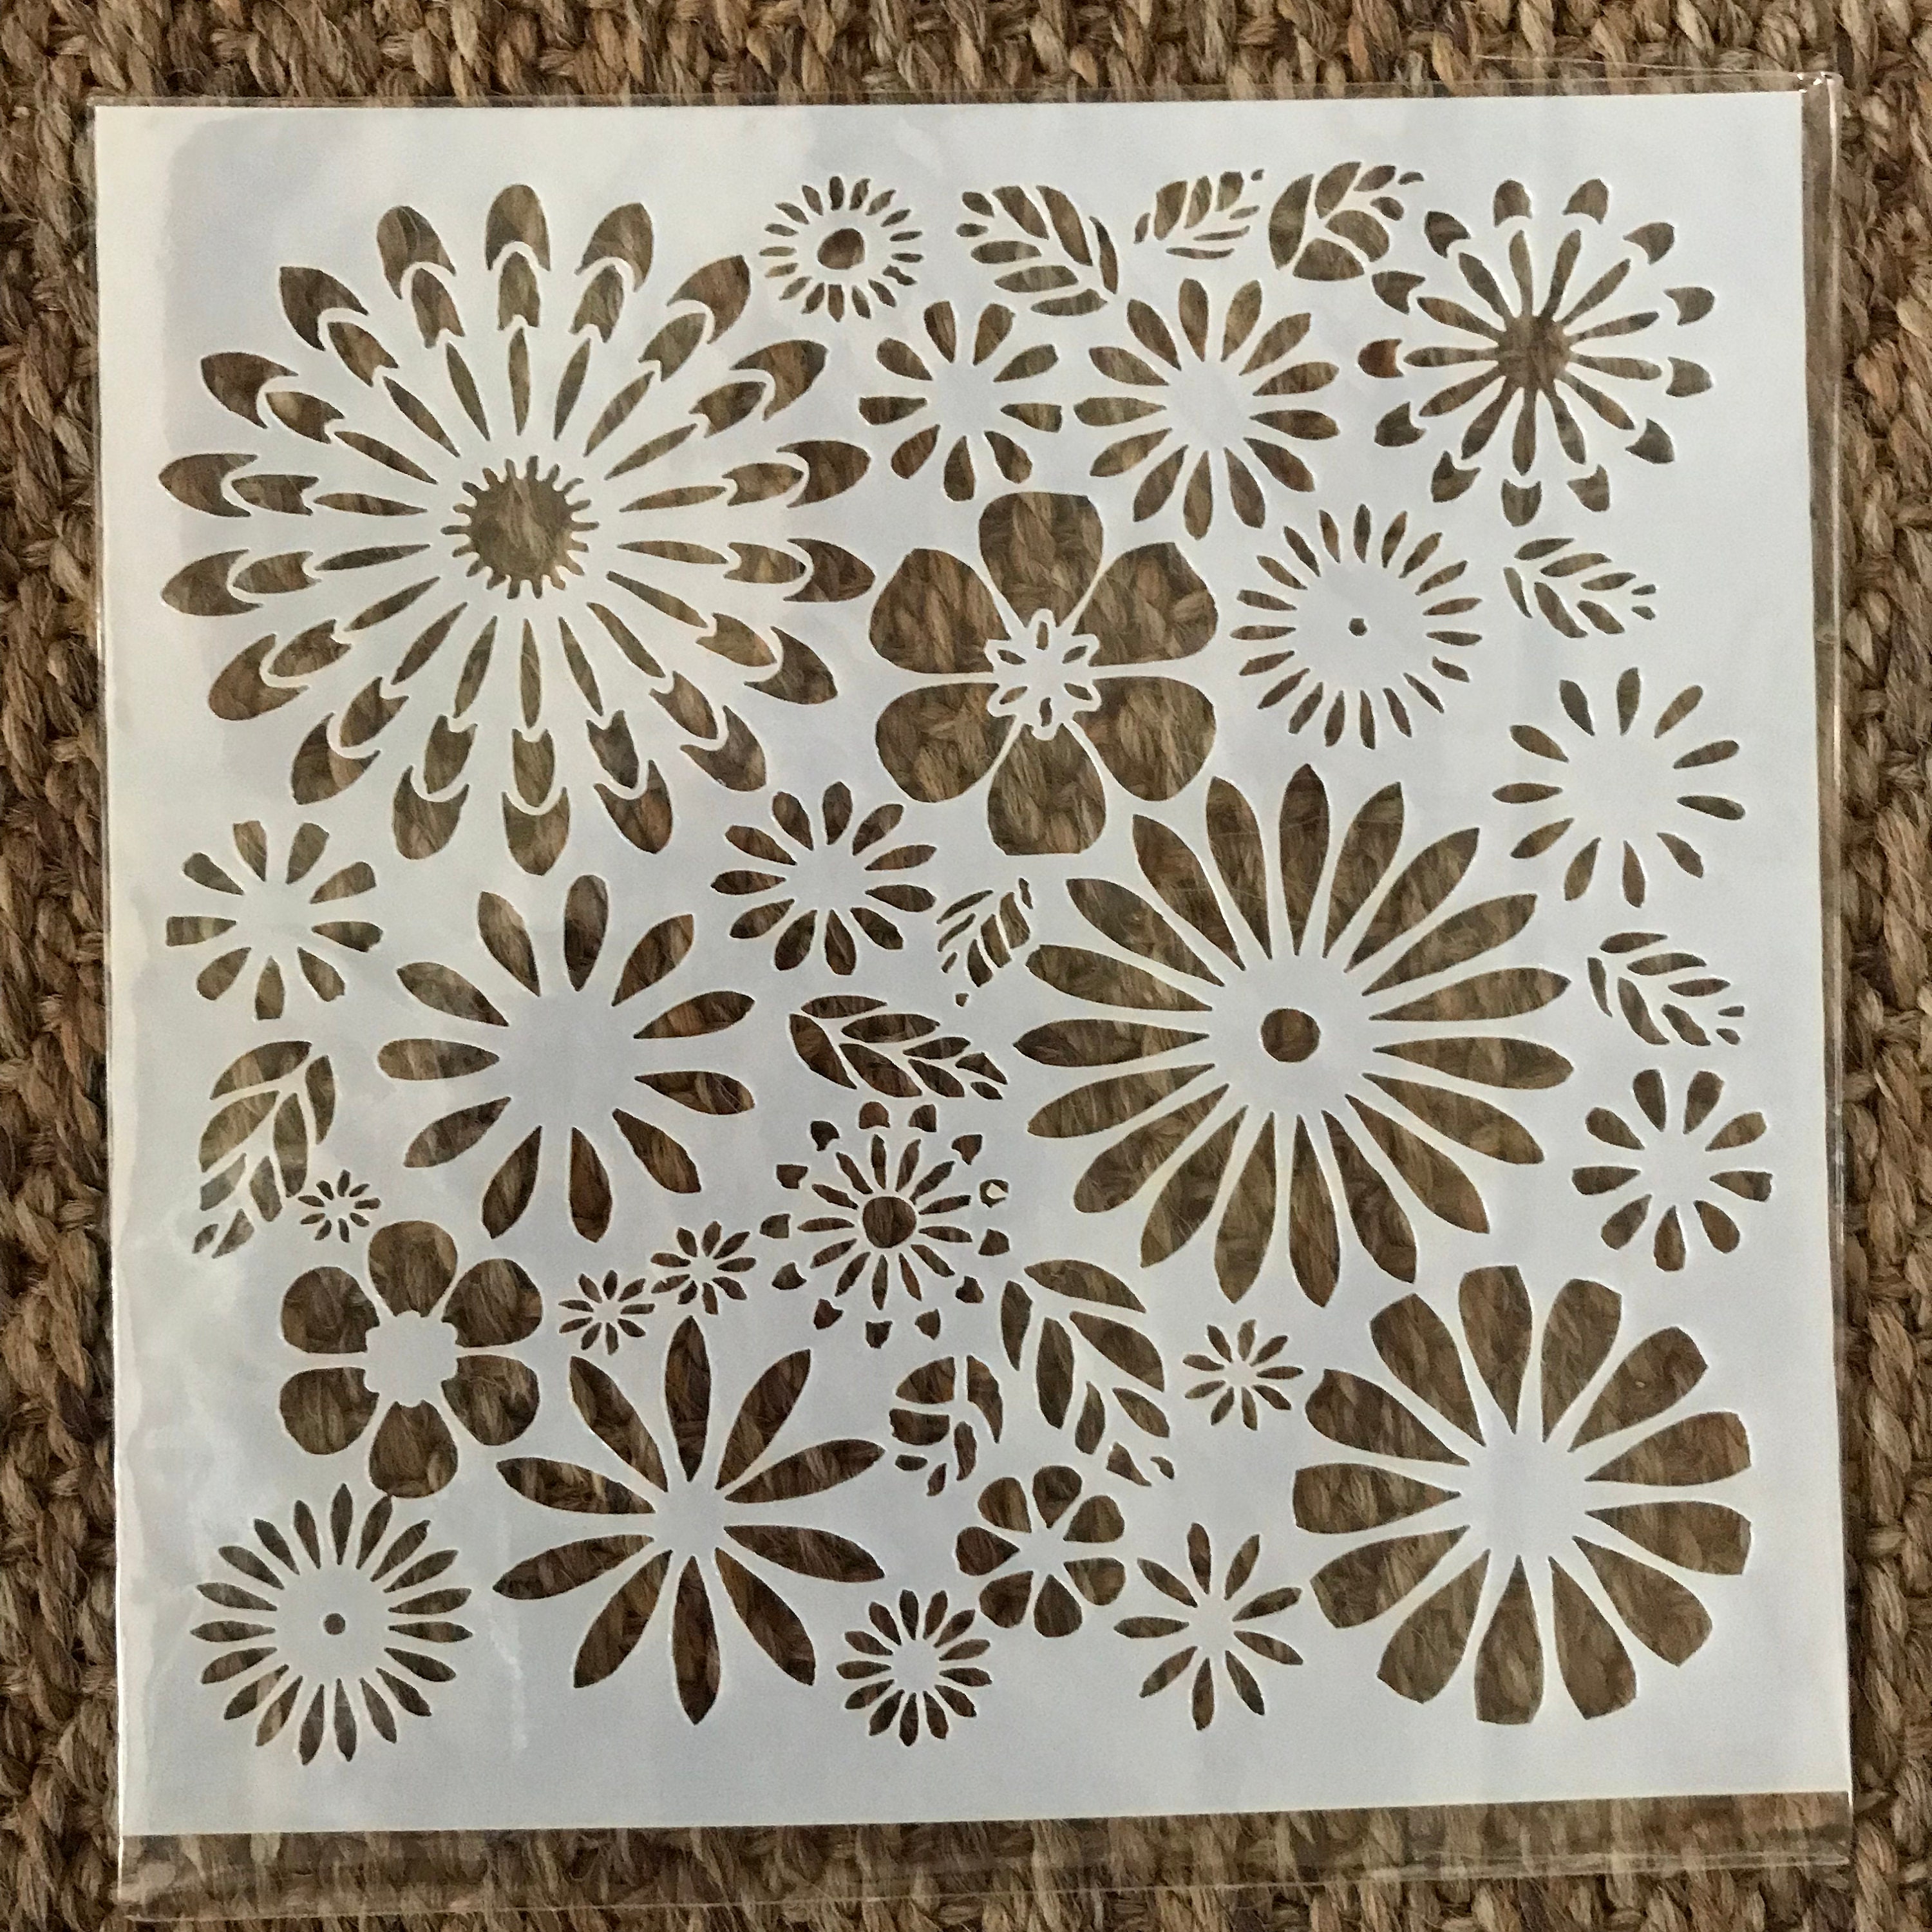 9 Set Small Christmas Stencils, 5x5 Inch Stencil for Painting on Wood,  Fabric, Paper, Windows, Christmas Ornaments, Cards, Decorations 